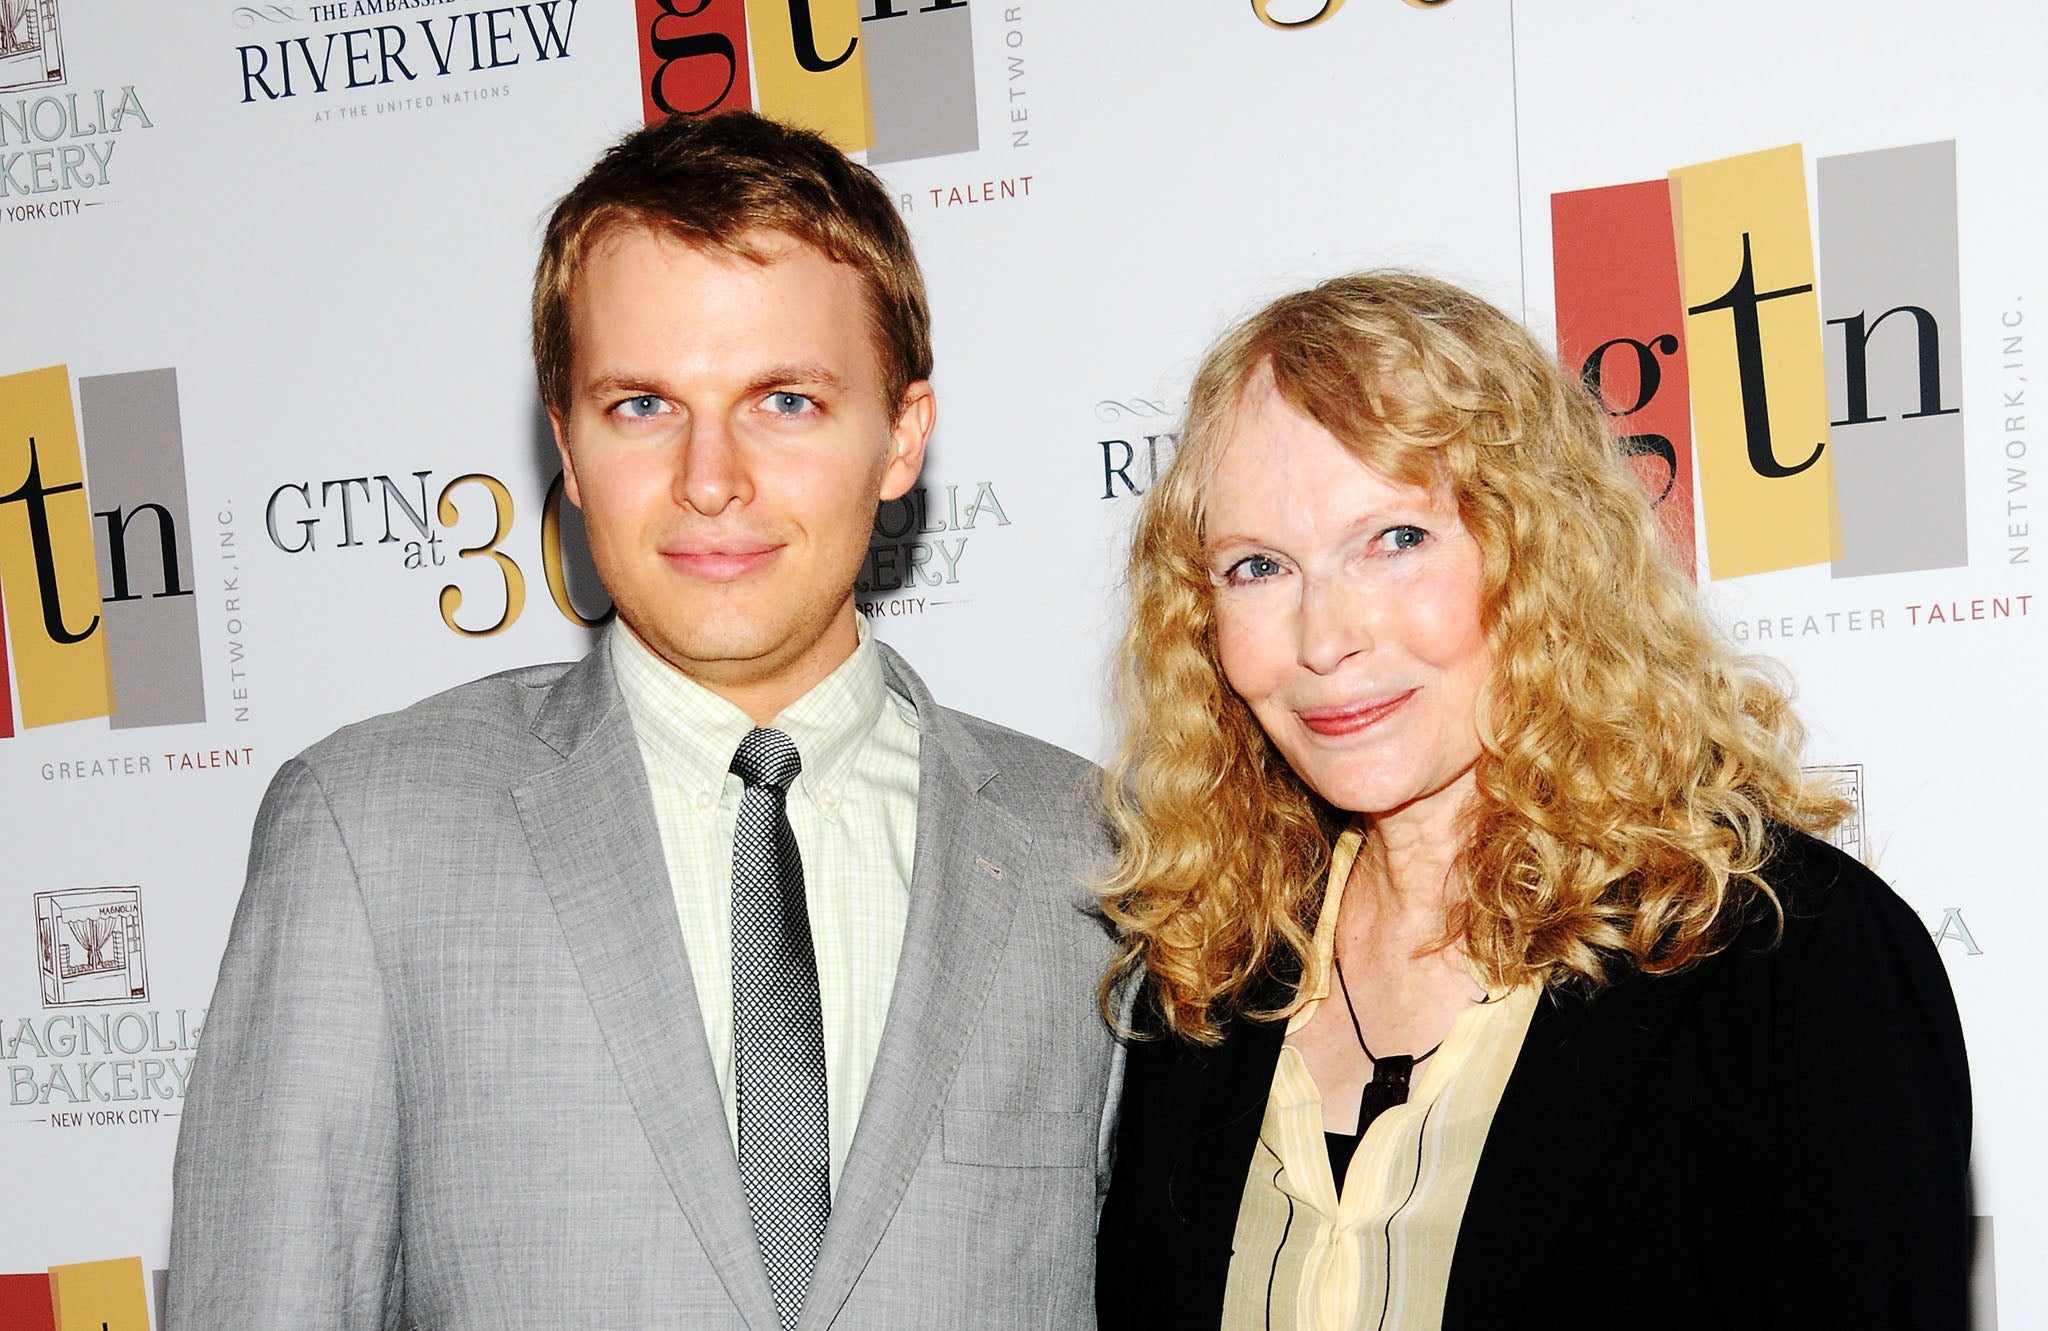 Ronan Farrow blasts dad Woody Allen during Golden Globes: ‘Did they put the part where a woman publicly confirmed he molested her at age 7 before or after Annie Hall?’